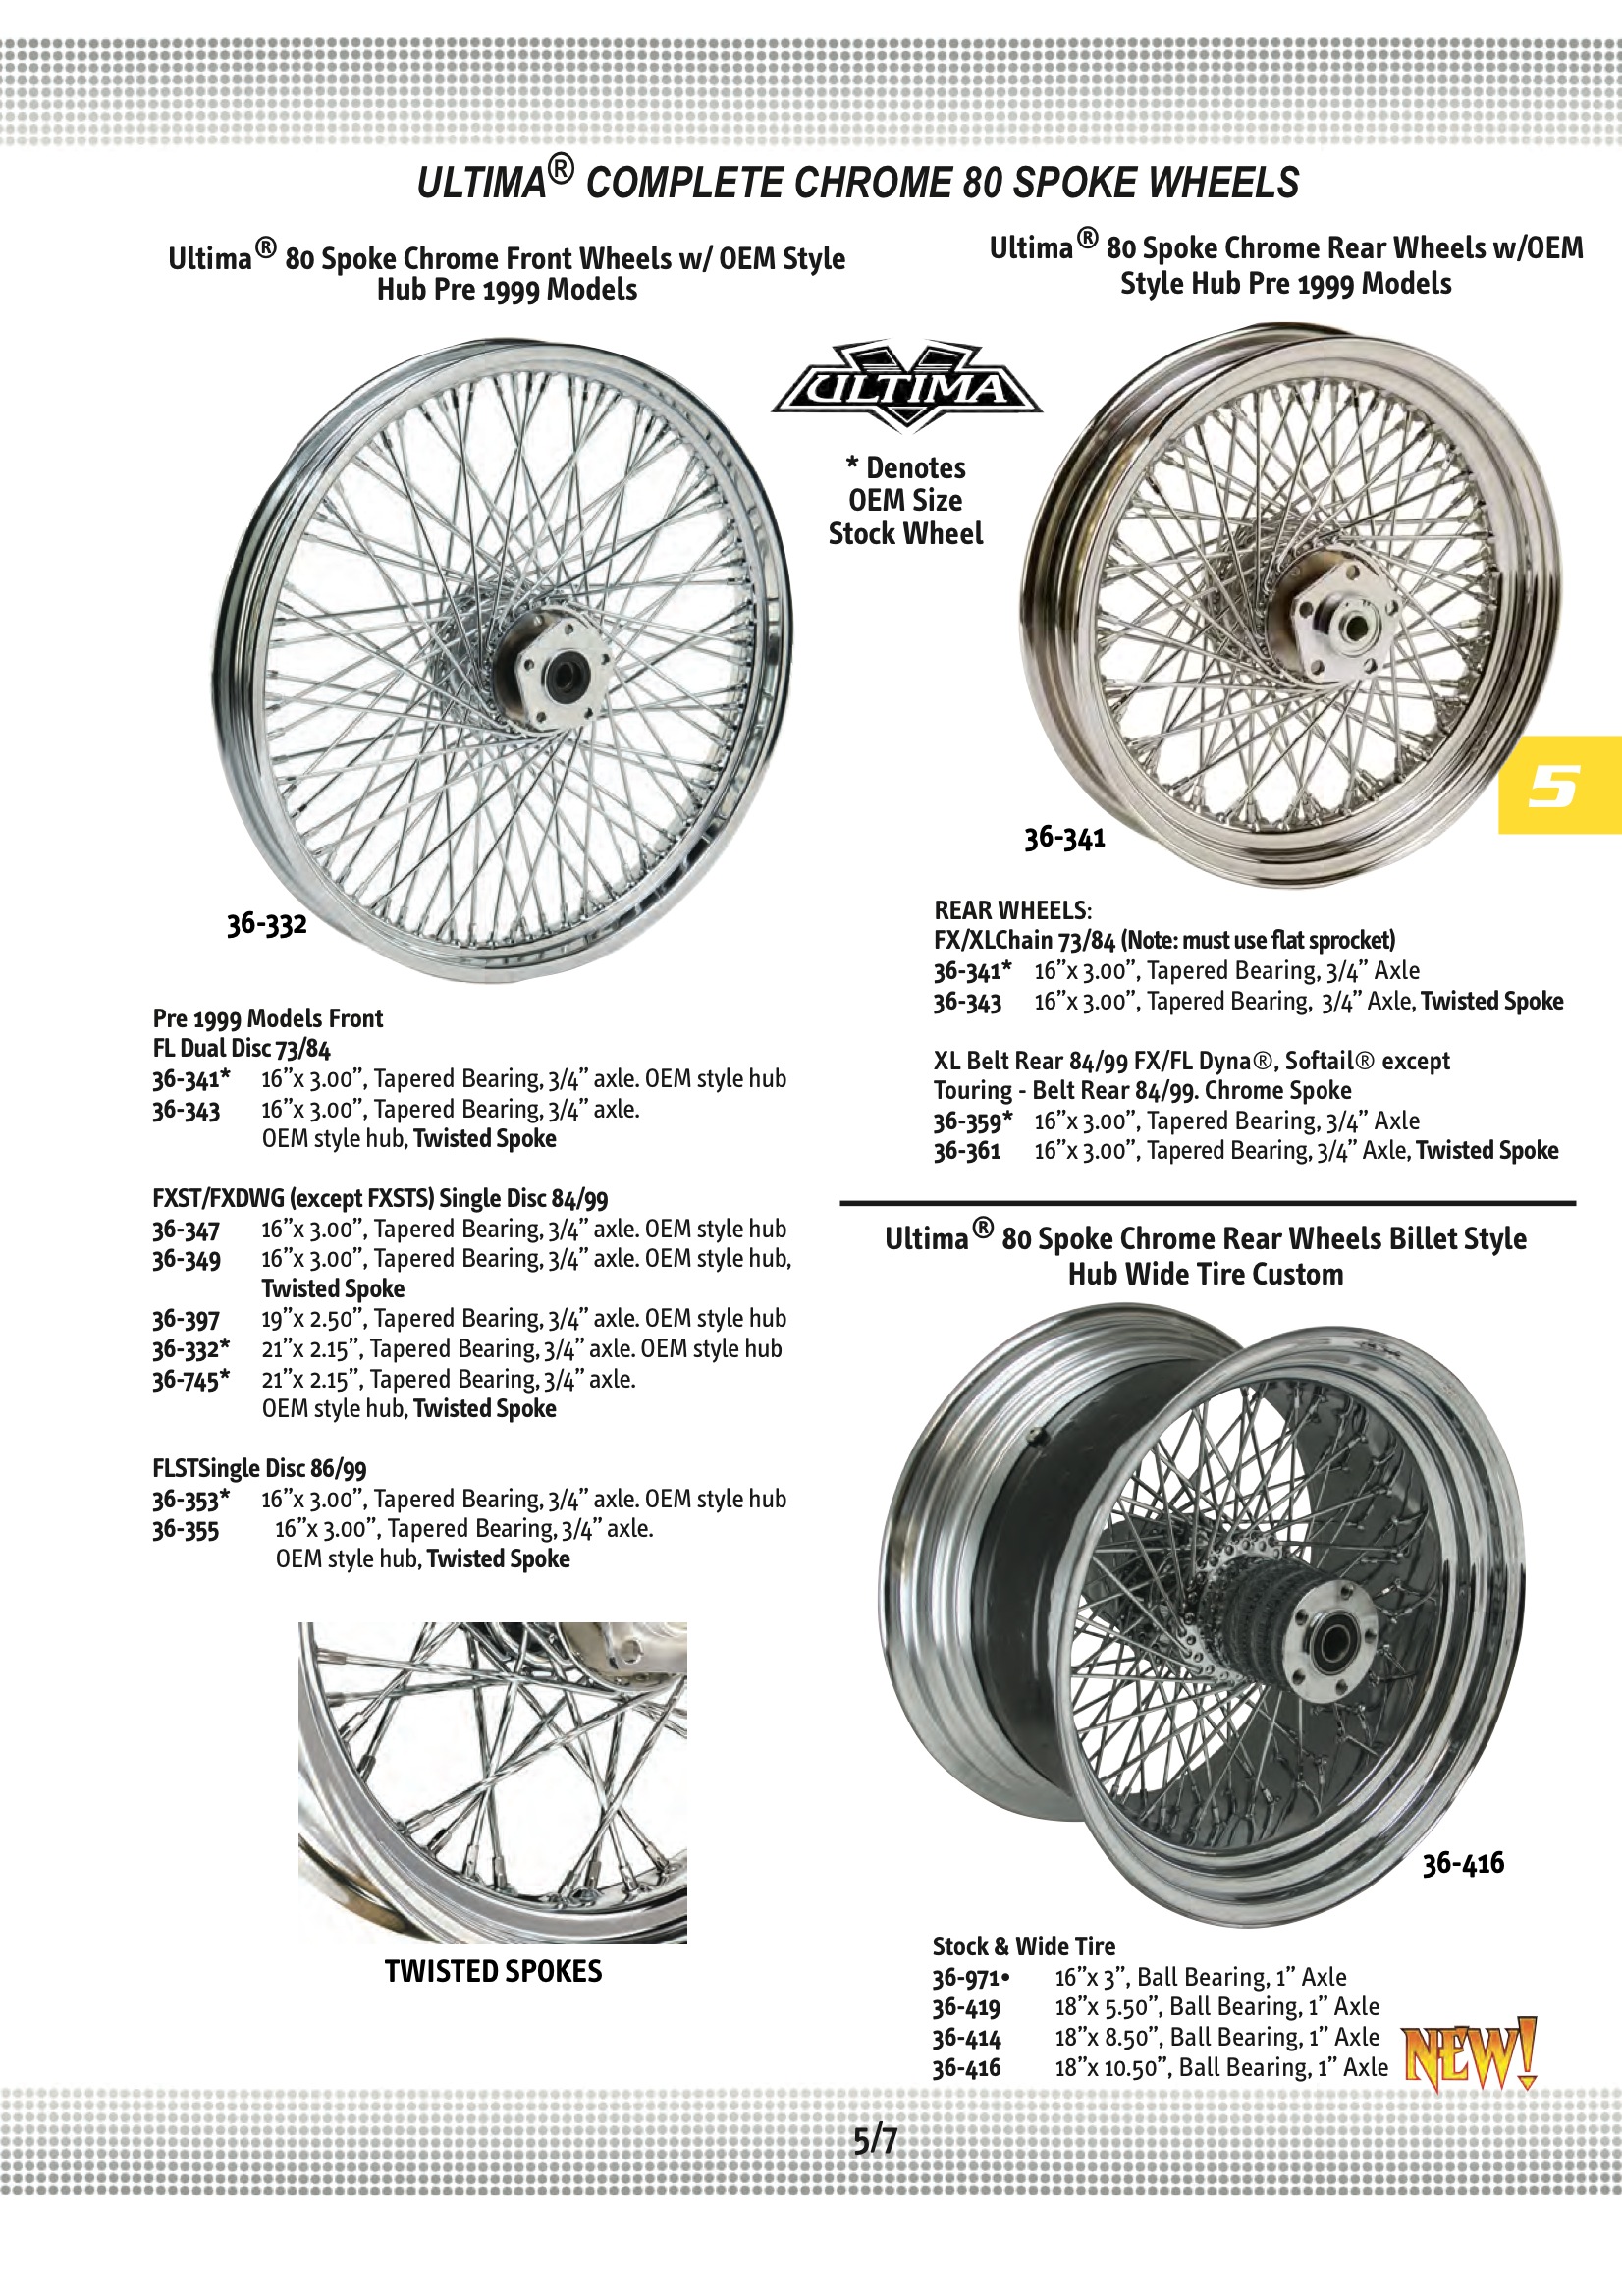 Ultima Complete Chrome 80 Twisted Spoke Front Wheel 16 x 3.0 Pre 1999 Models FL Dual Disc 73/84 